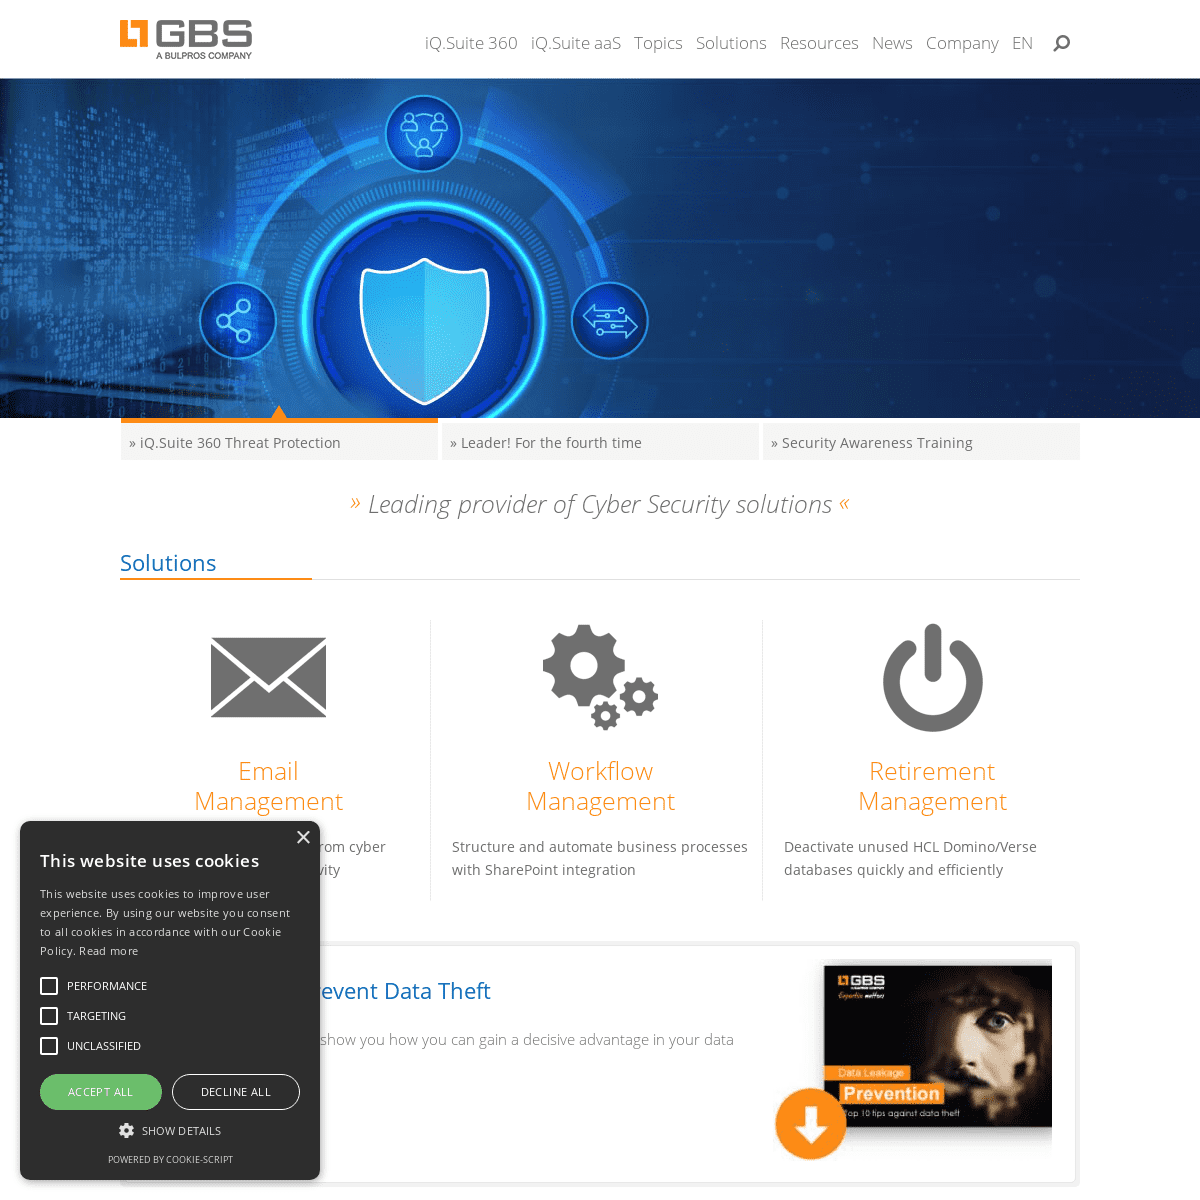 A complete backup of https://gbs.com